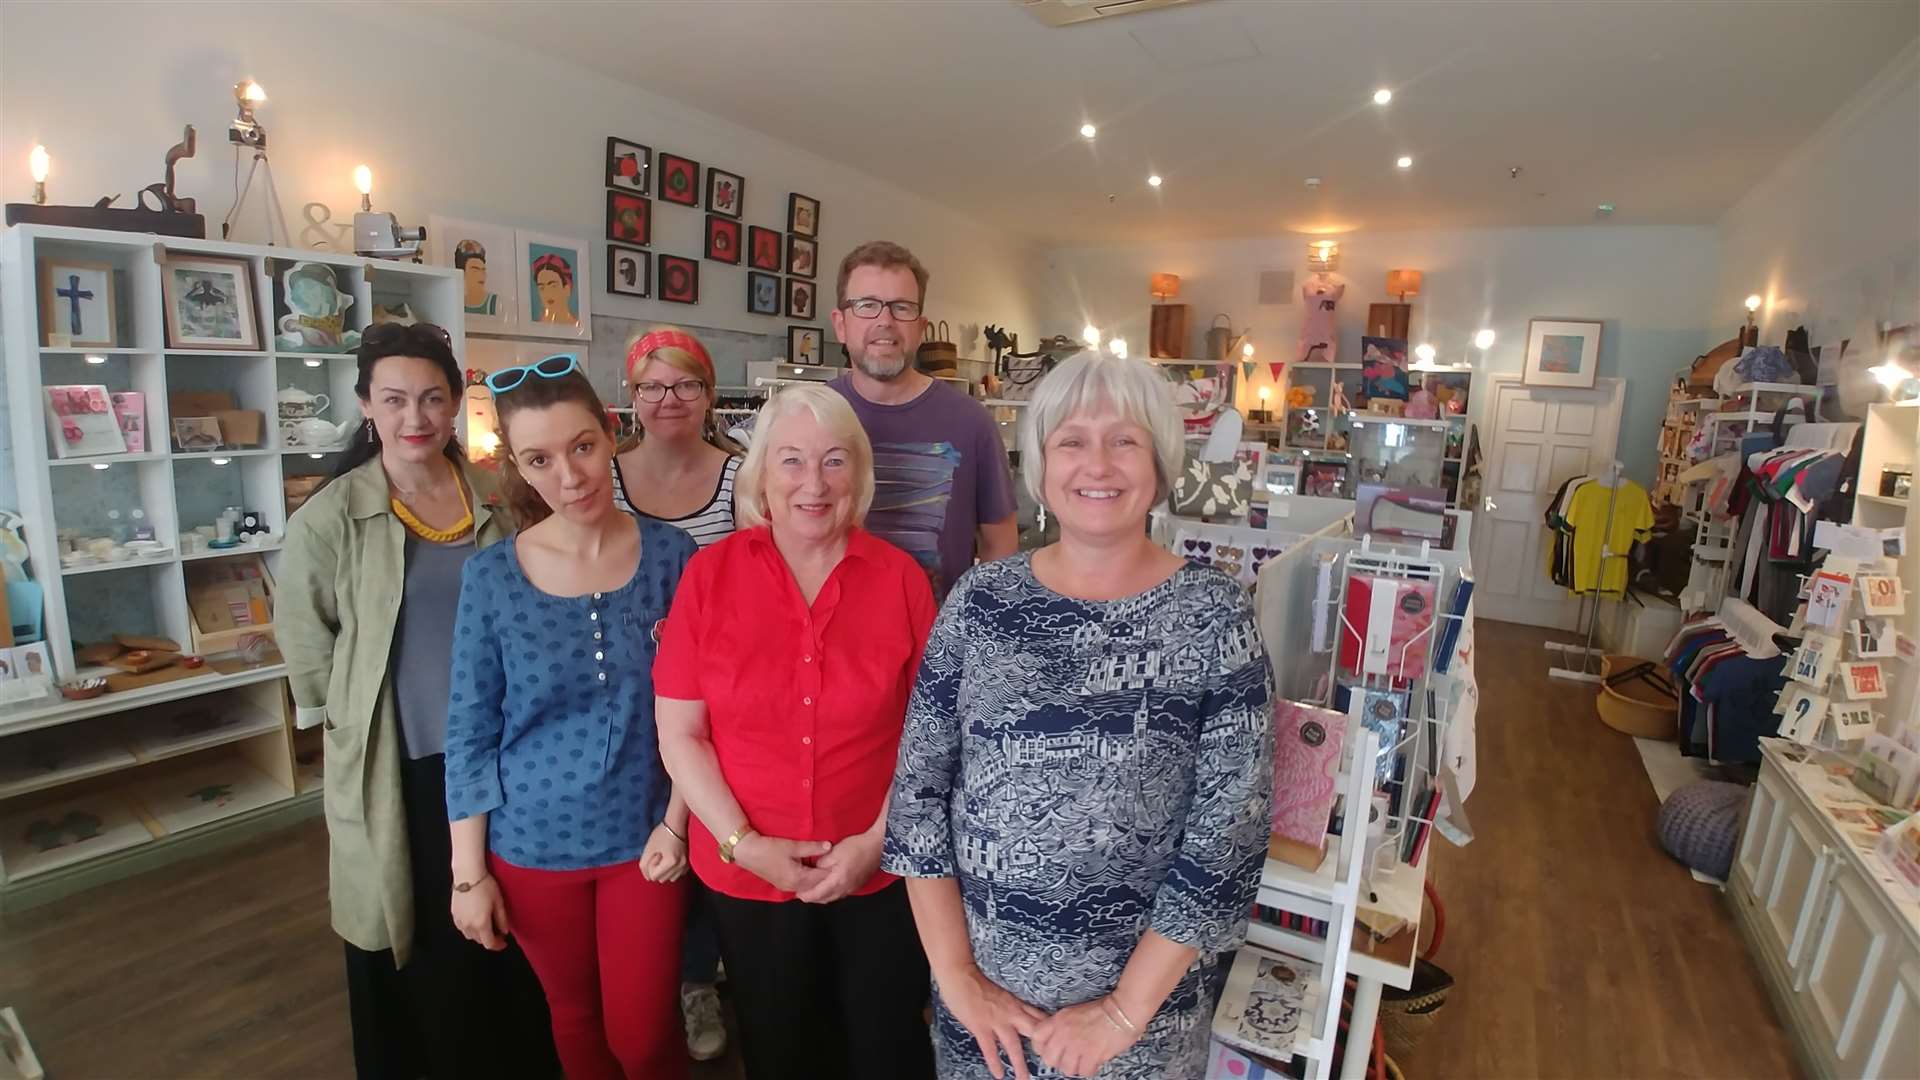 The emporium was started by Emma Davis, left, pictured with artists Lydia Witts, Amber Hudson-Peacock from The Wild Beehive, author Carol Creasey, artist David Weeks and Jane Padgham, who creates fused glasswork